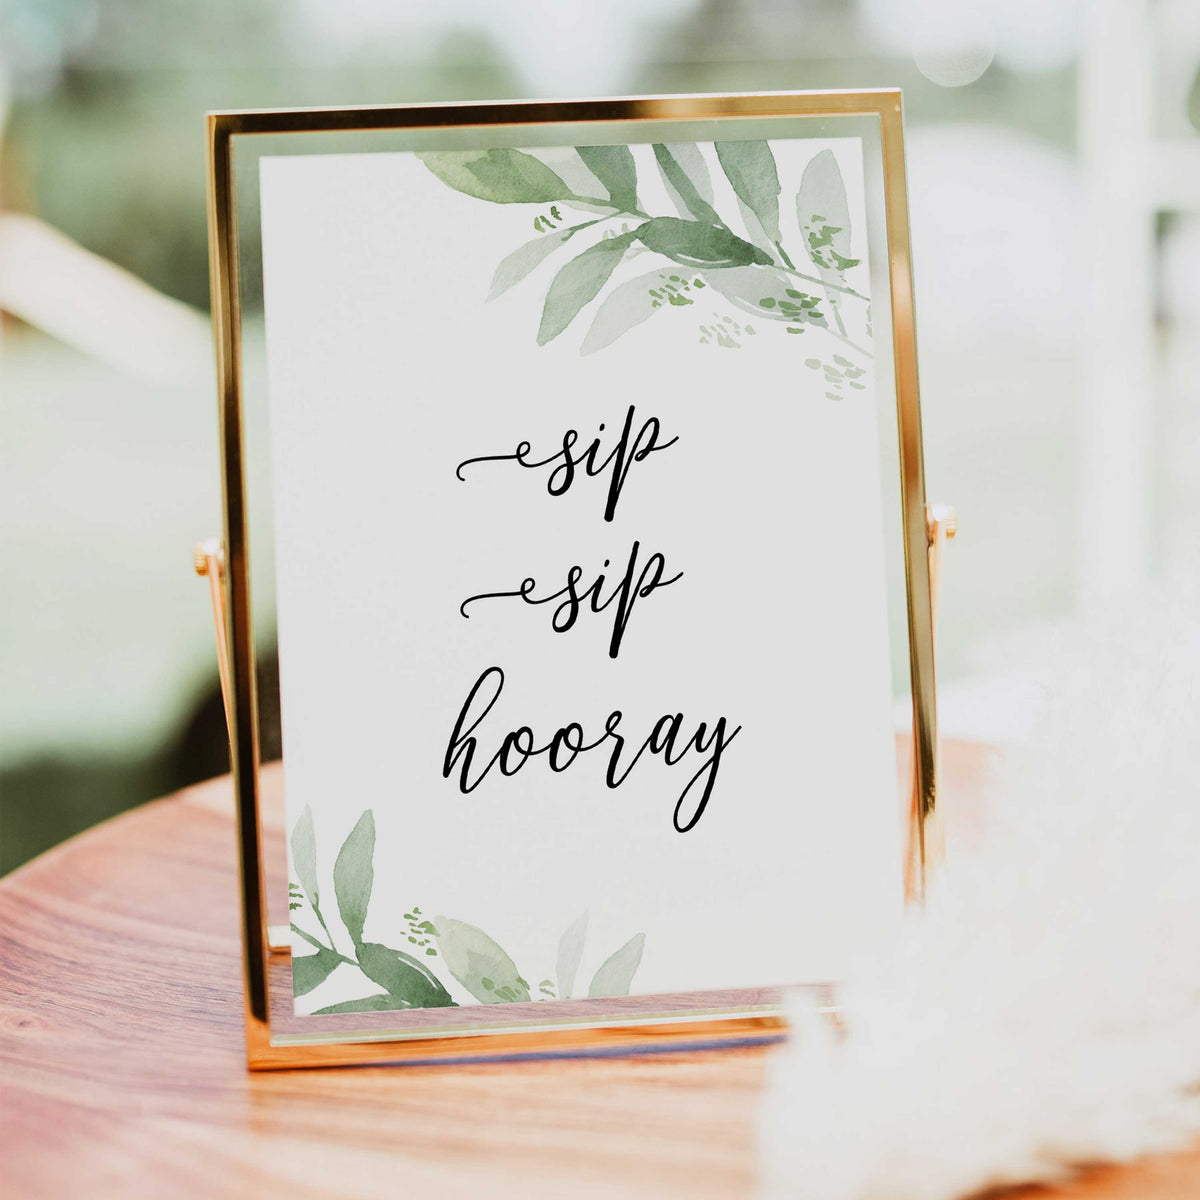 sip sip hooray sign, greenery bridal shower, fun bridal shower games, bachelorette party games, floral bridal games, hen party ideas